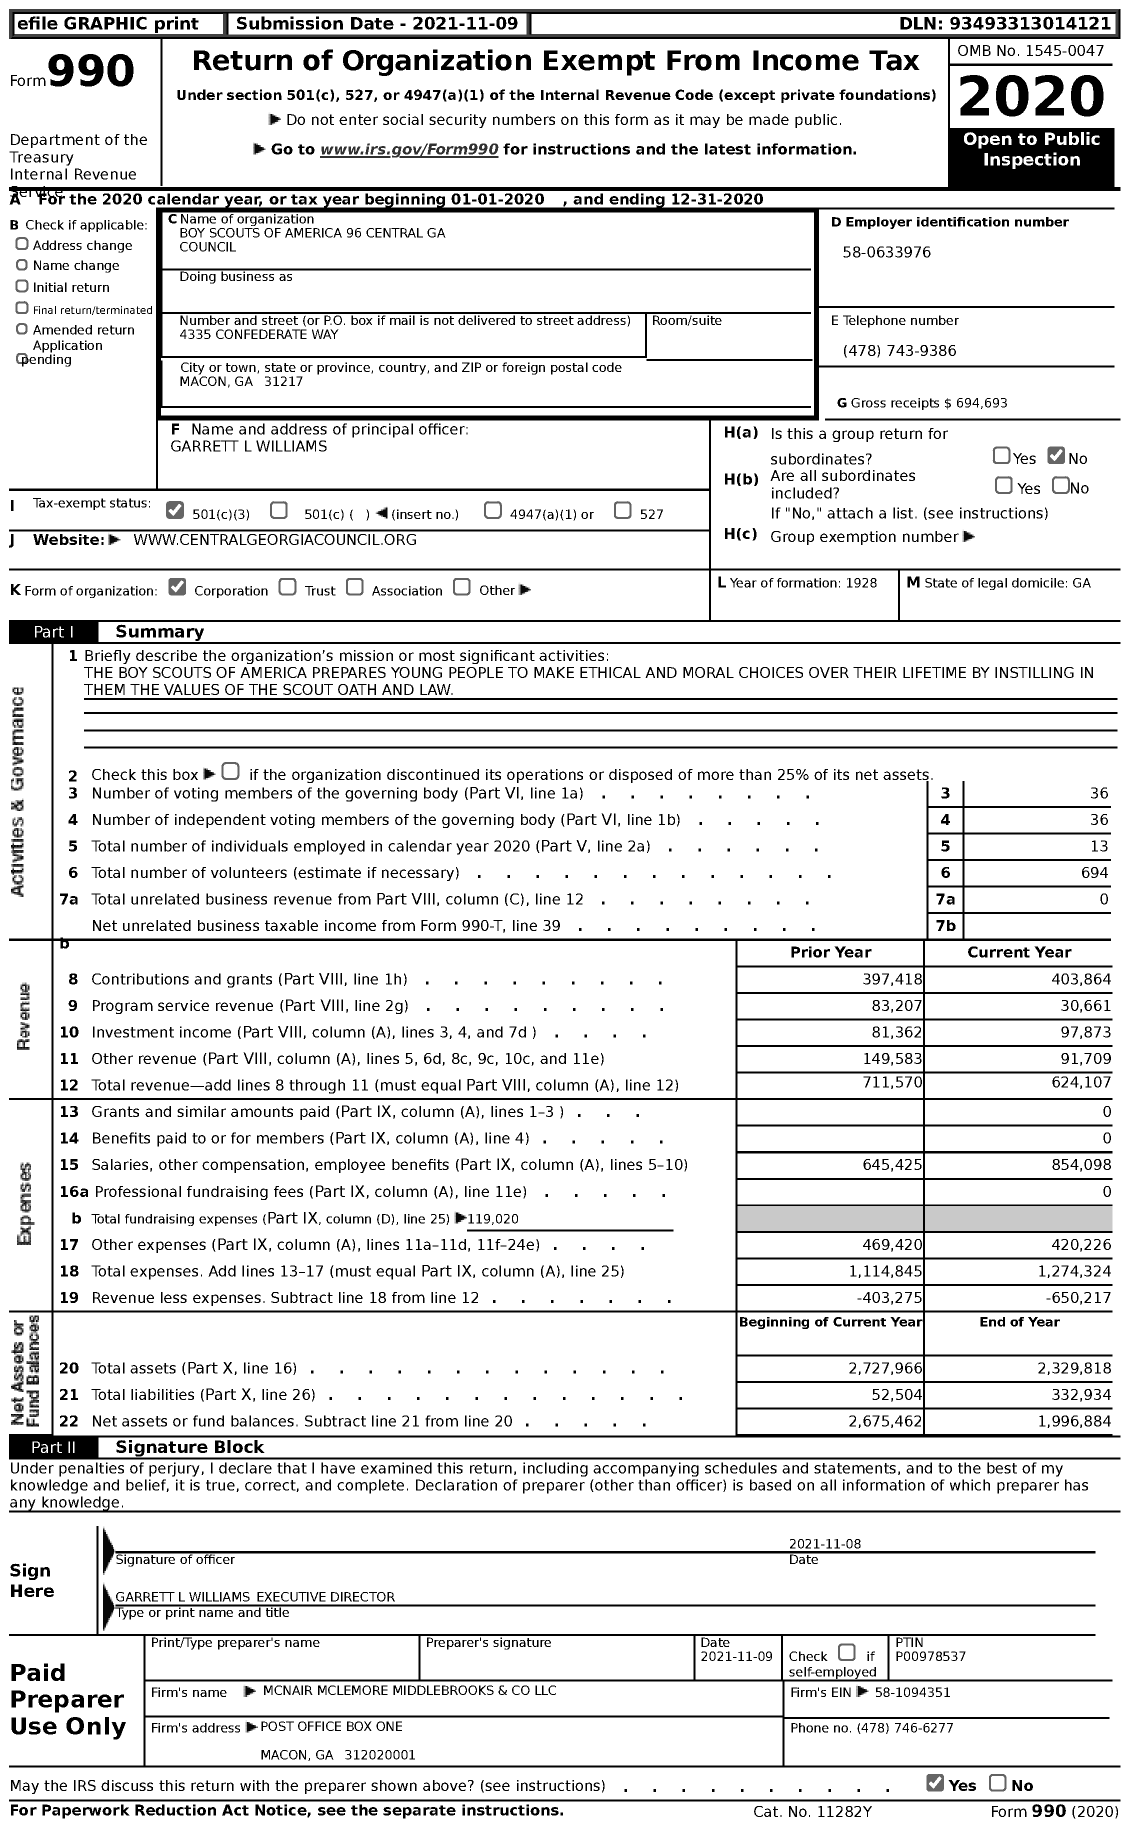 Image of first page of 2020 Form 990 for Boy Scouts of America - 96 Central Georgia Council